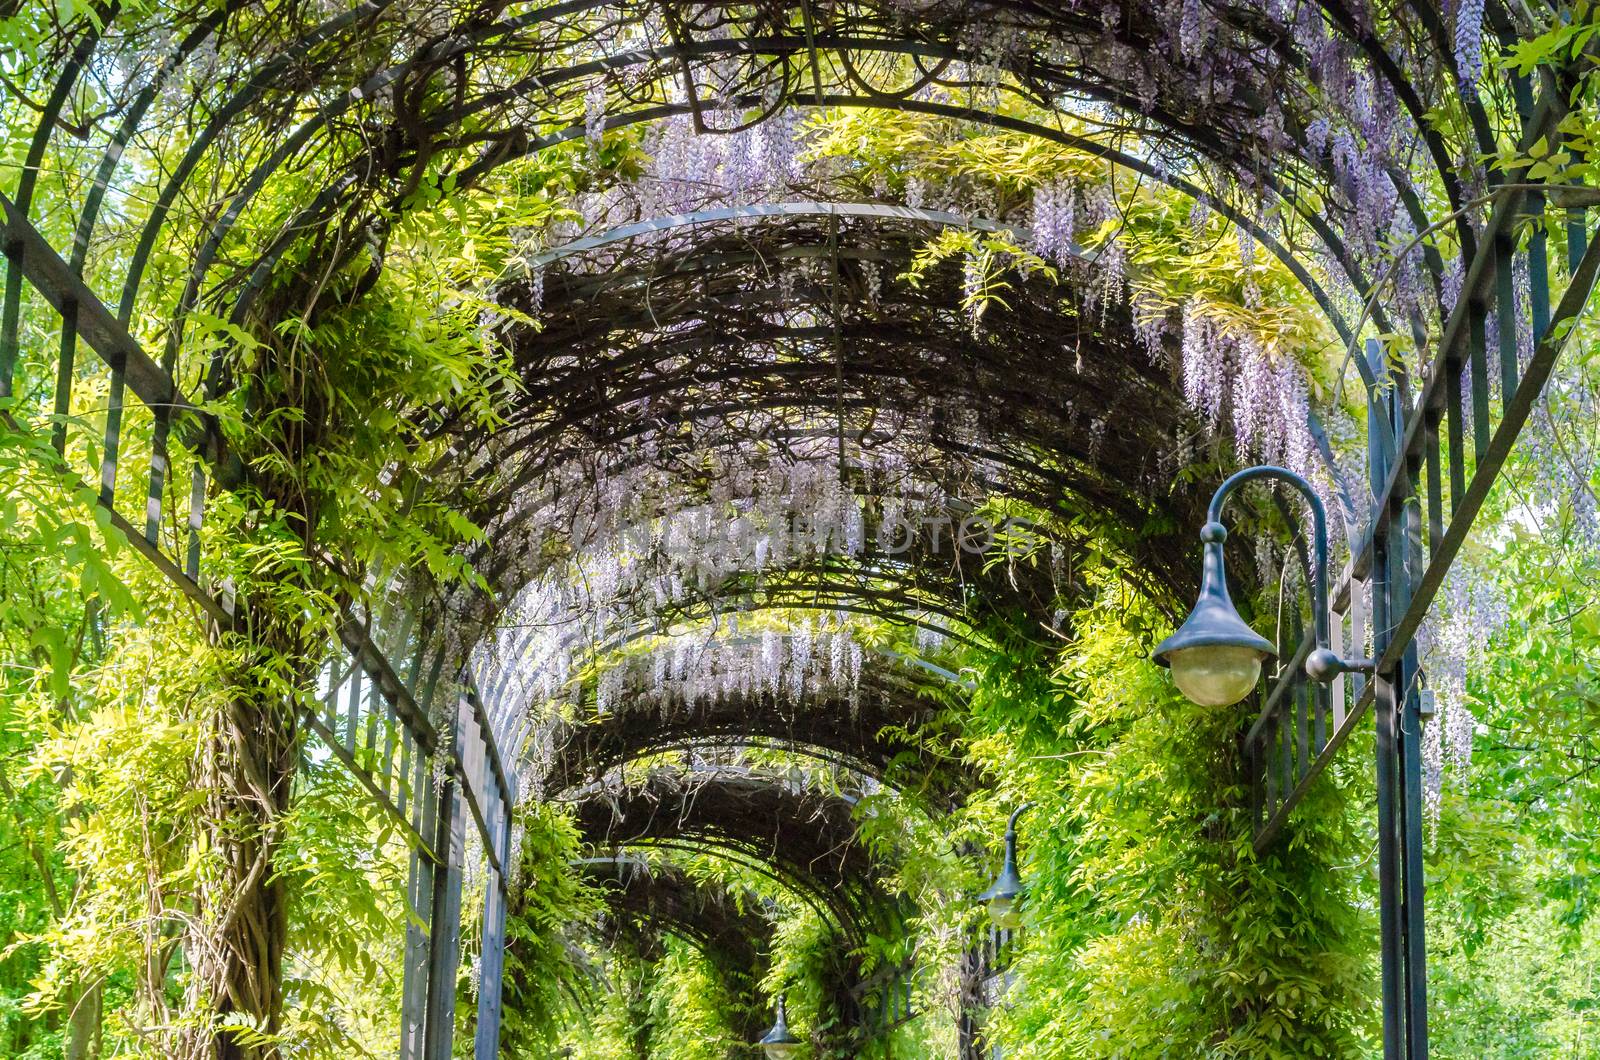 Flowers and trees grew into a kind of garden tunnel.
